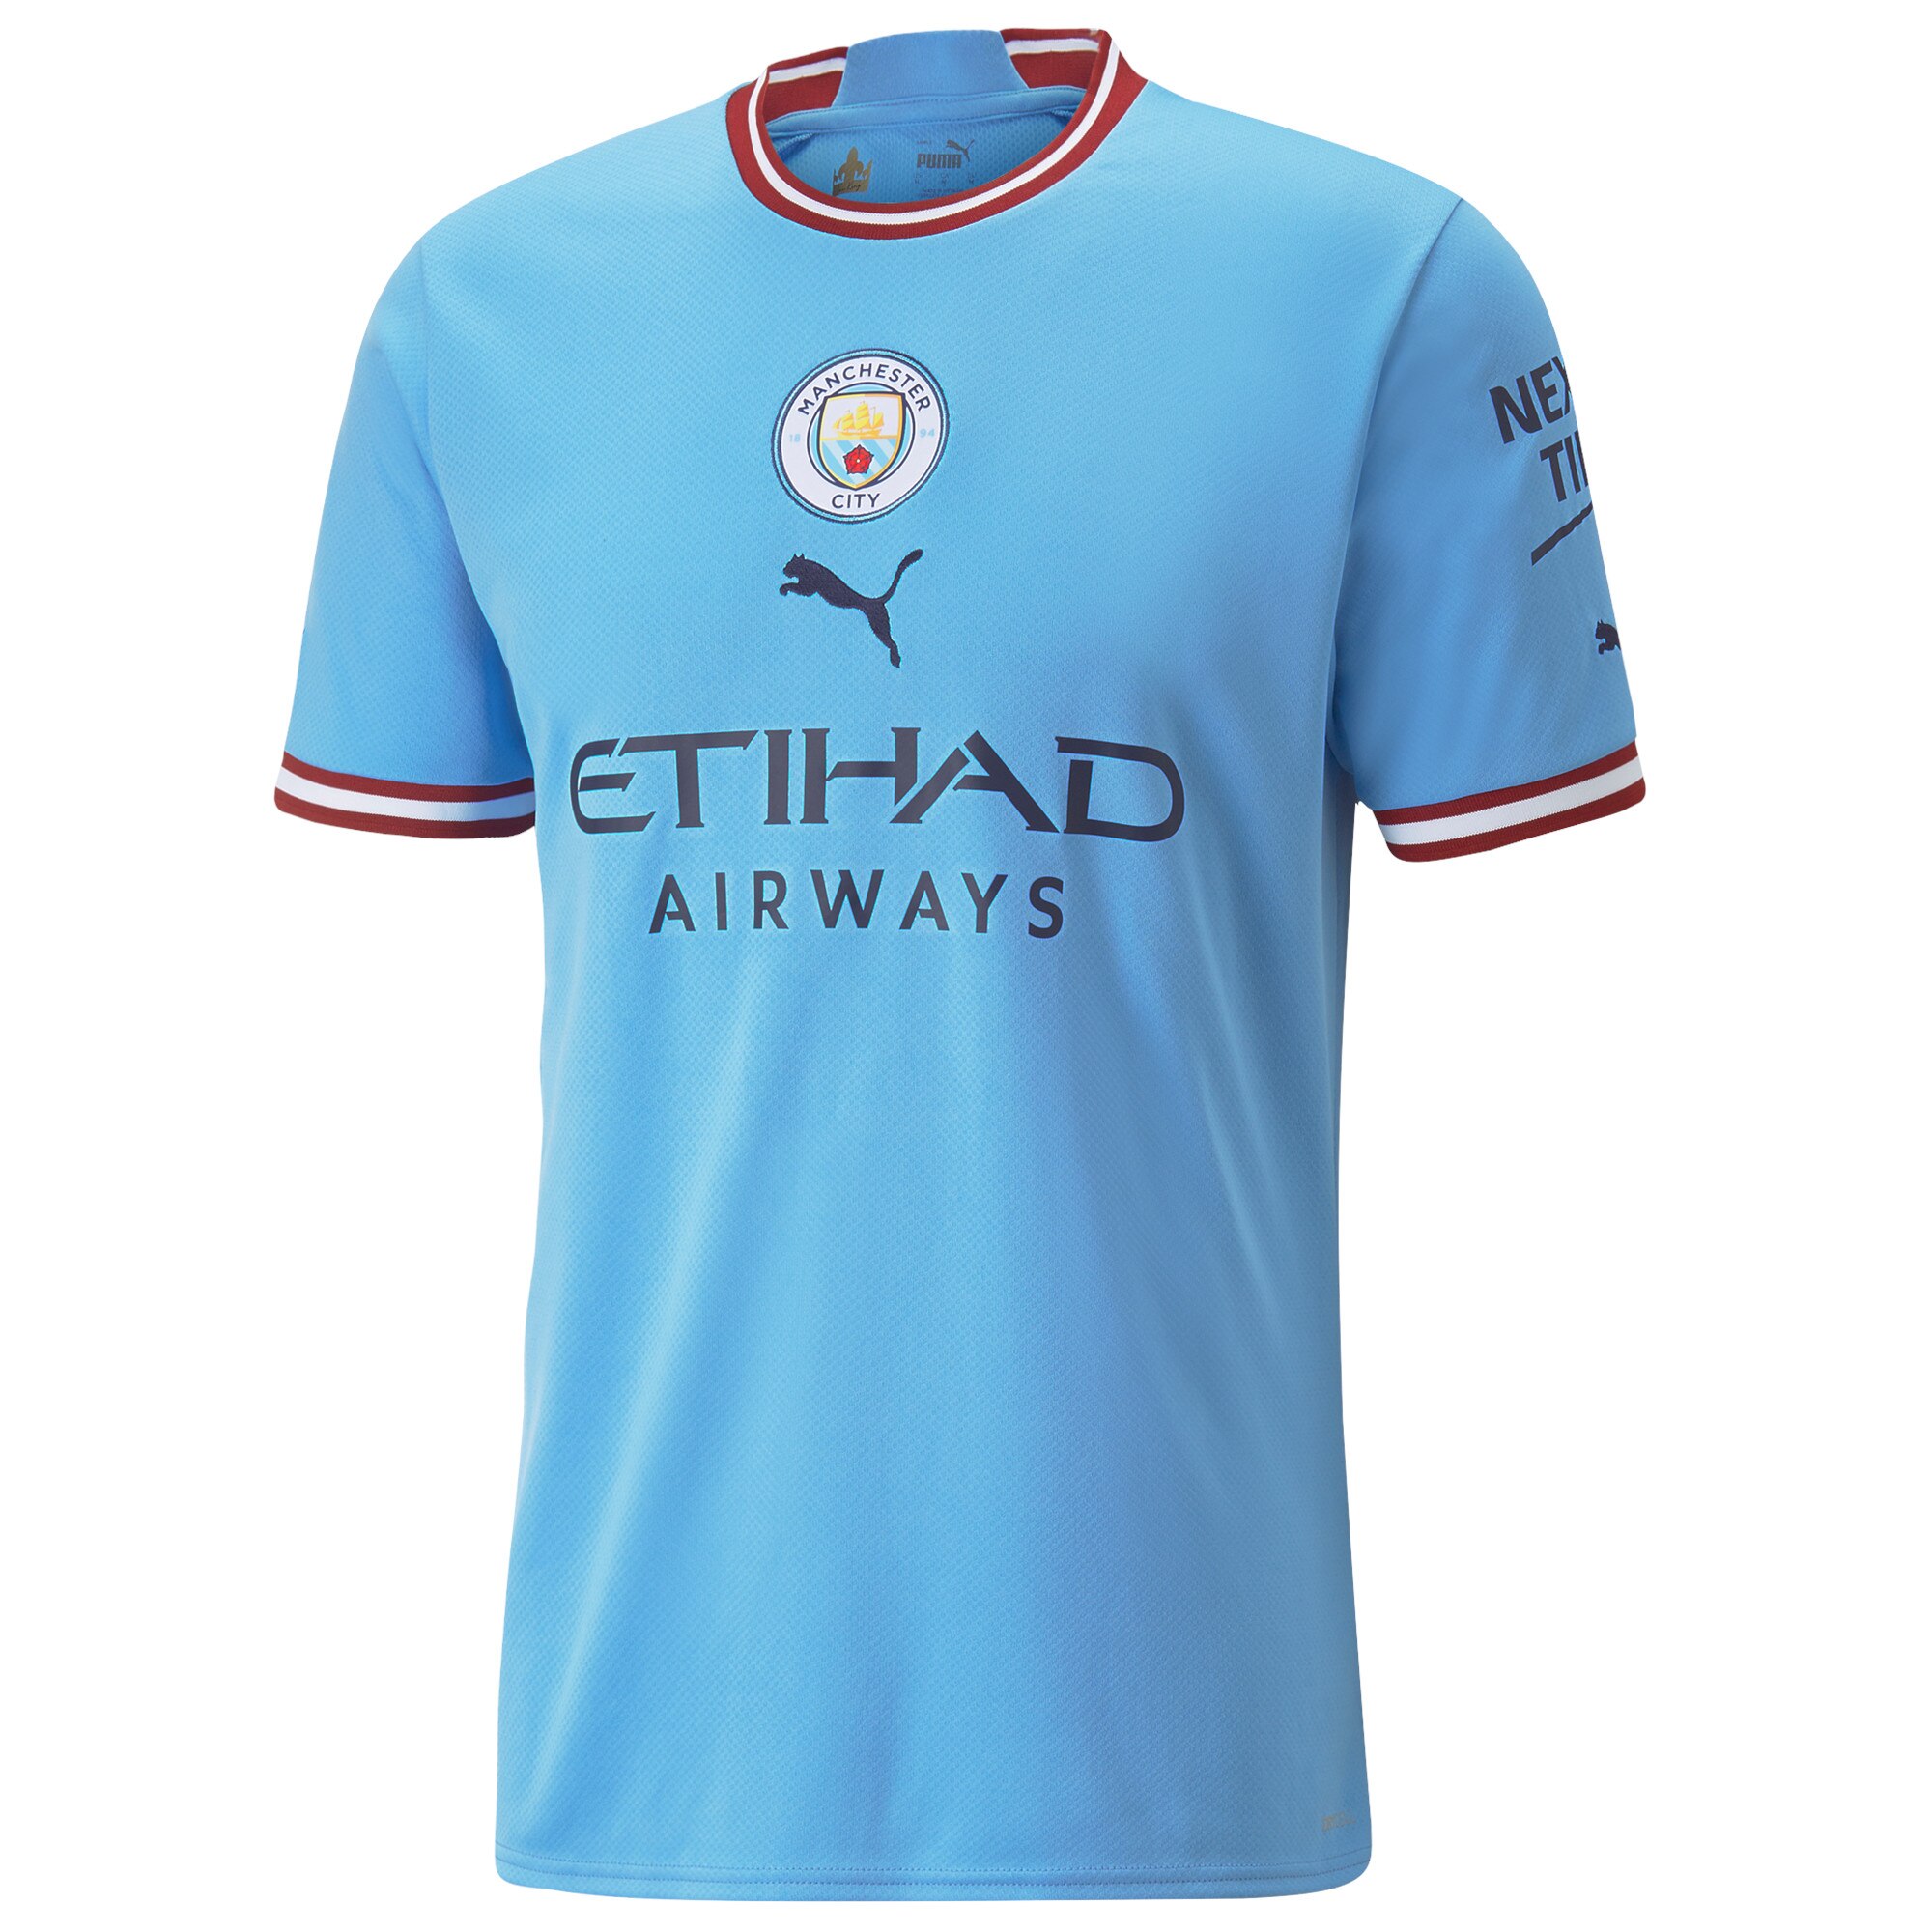 Manchester City Home Shirt 2022/23 with Rúben 3 printing